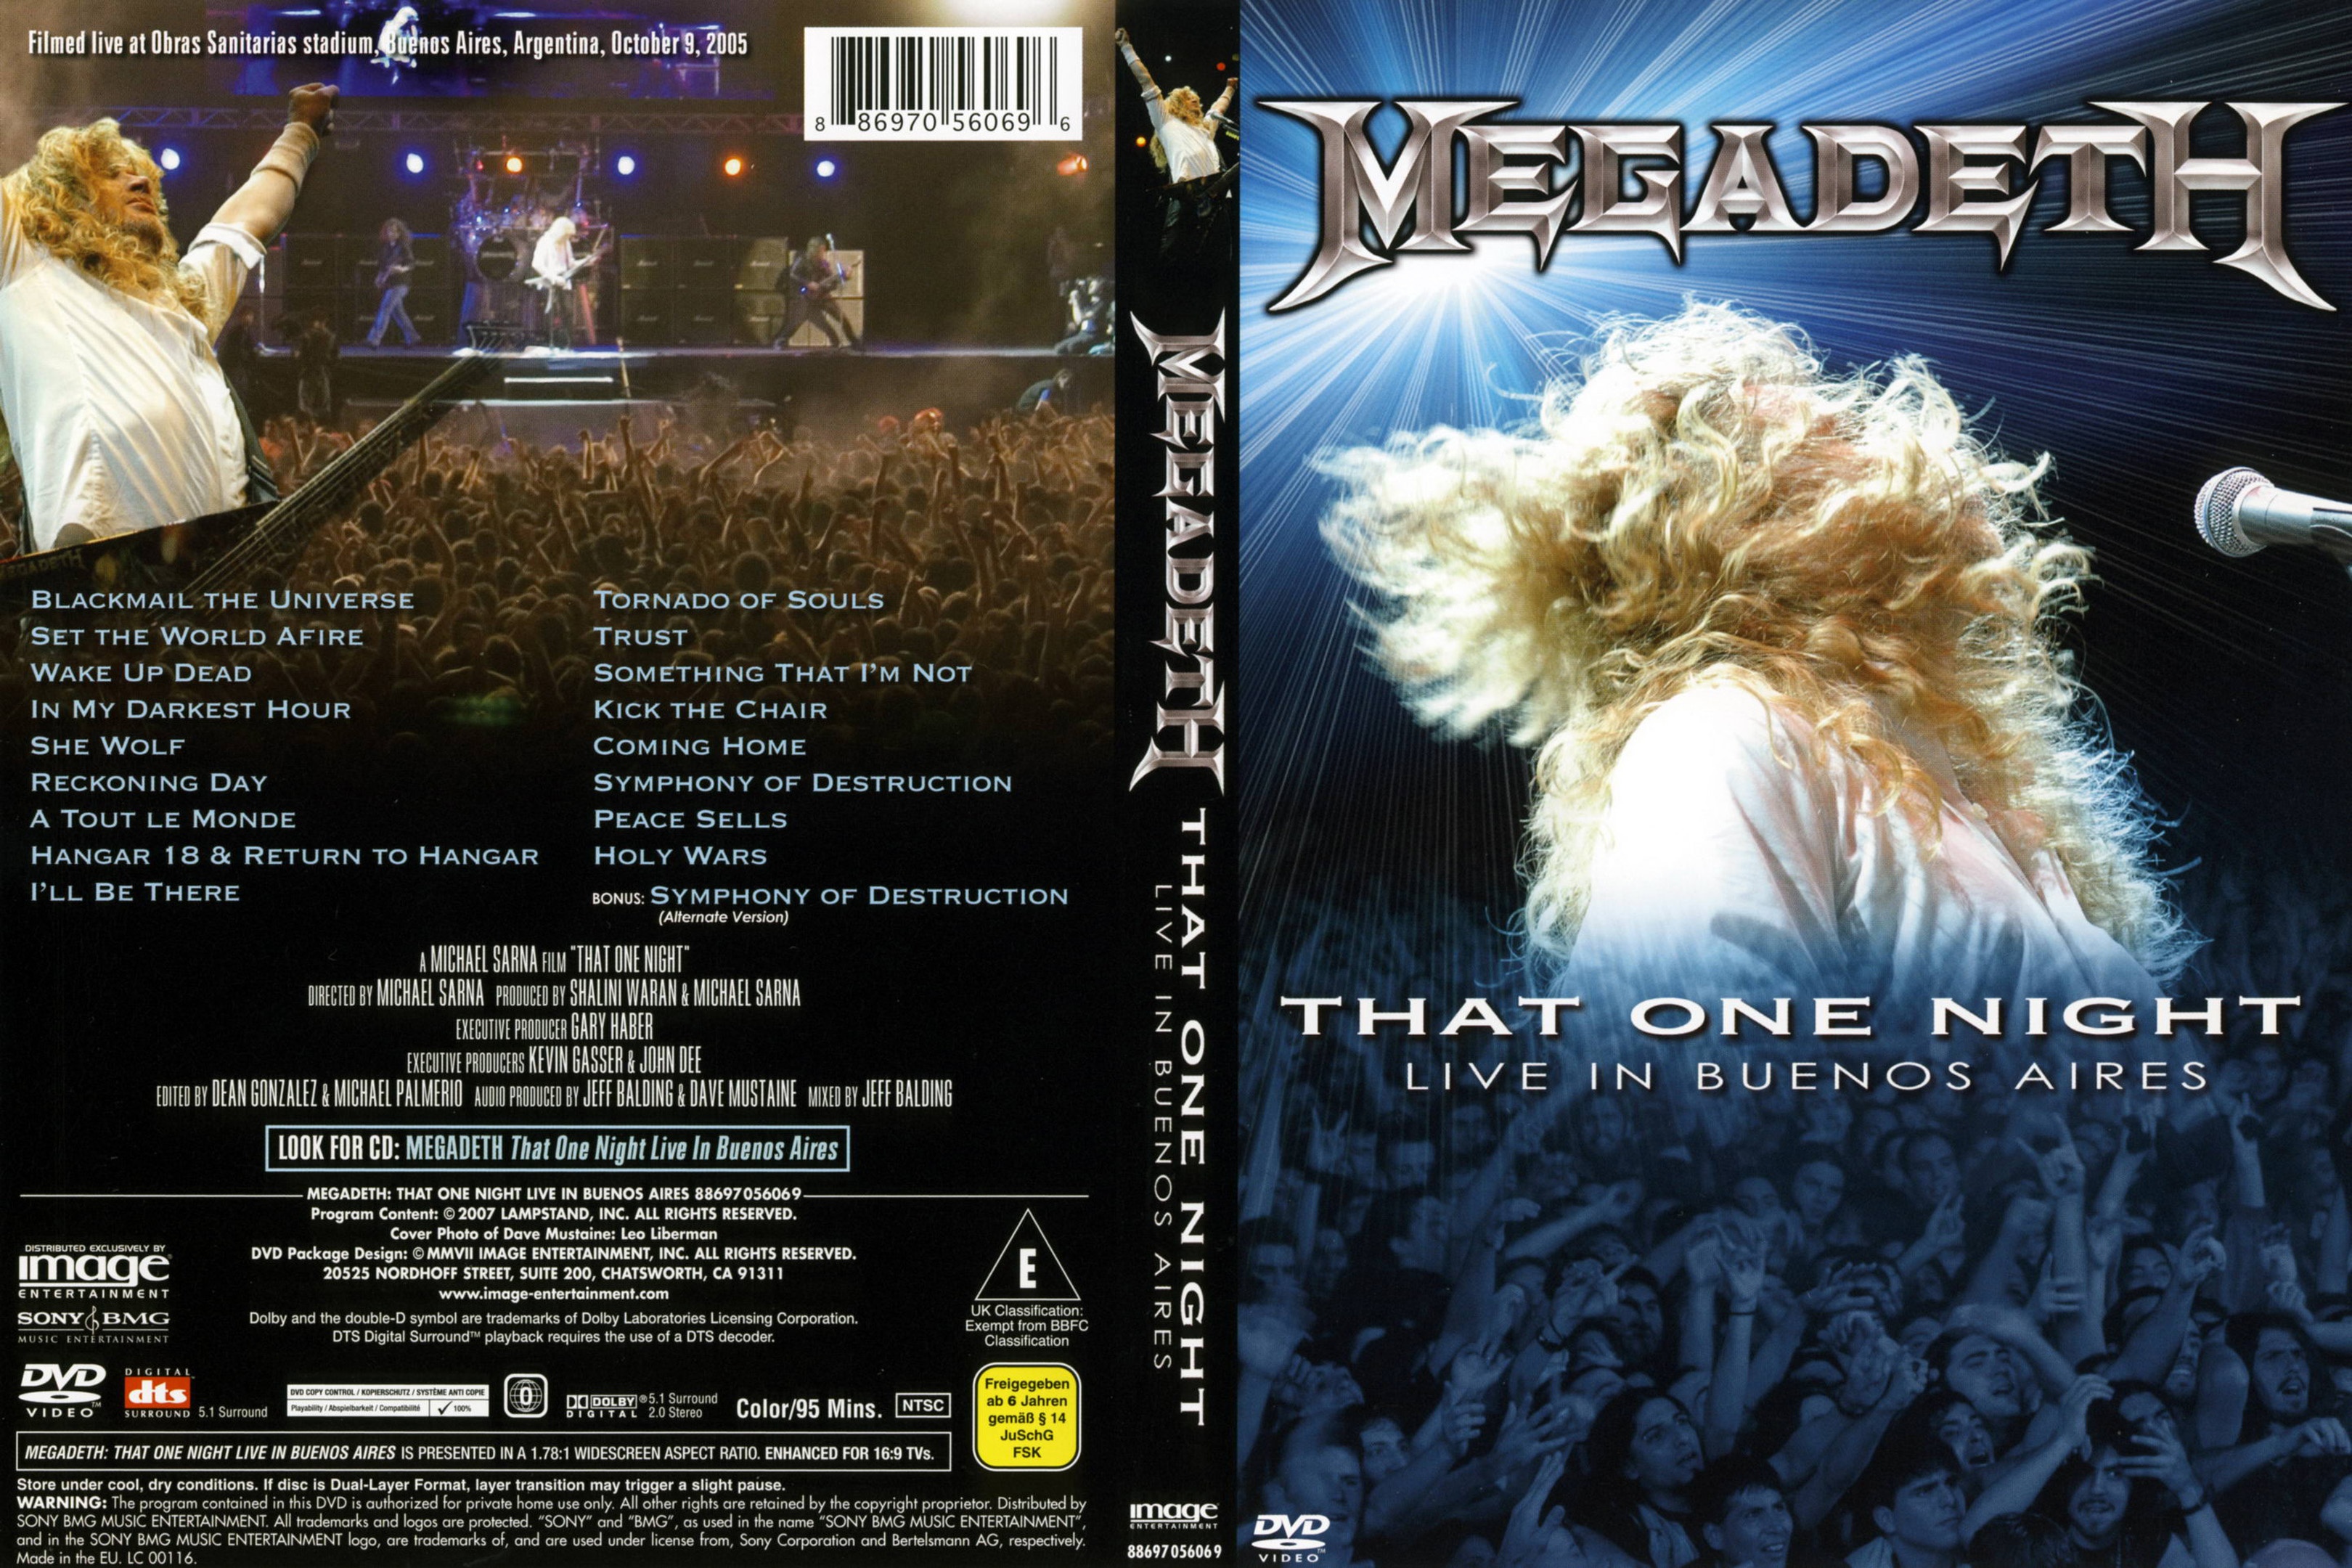 Jaquette DVD Megadeth That one night Live in Buenos Aires